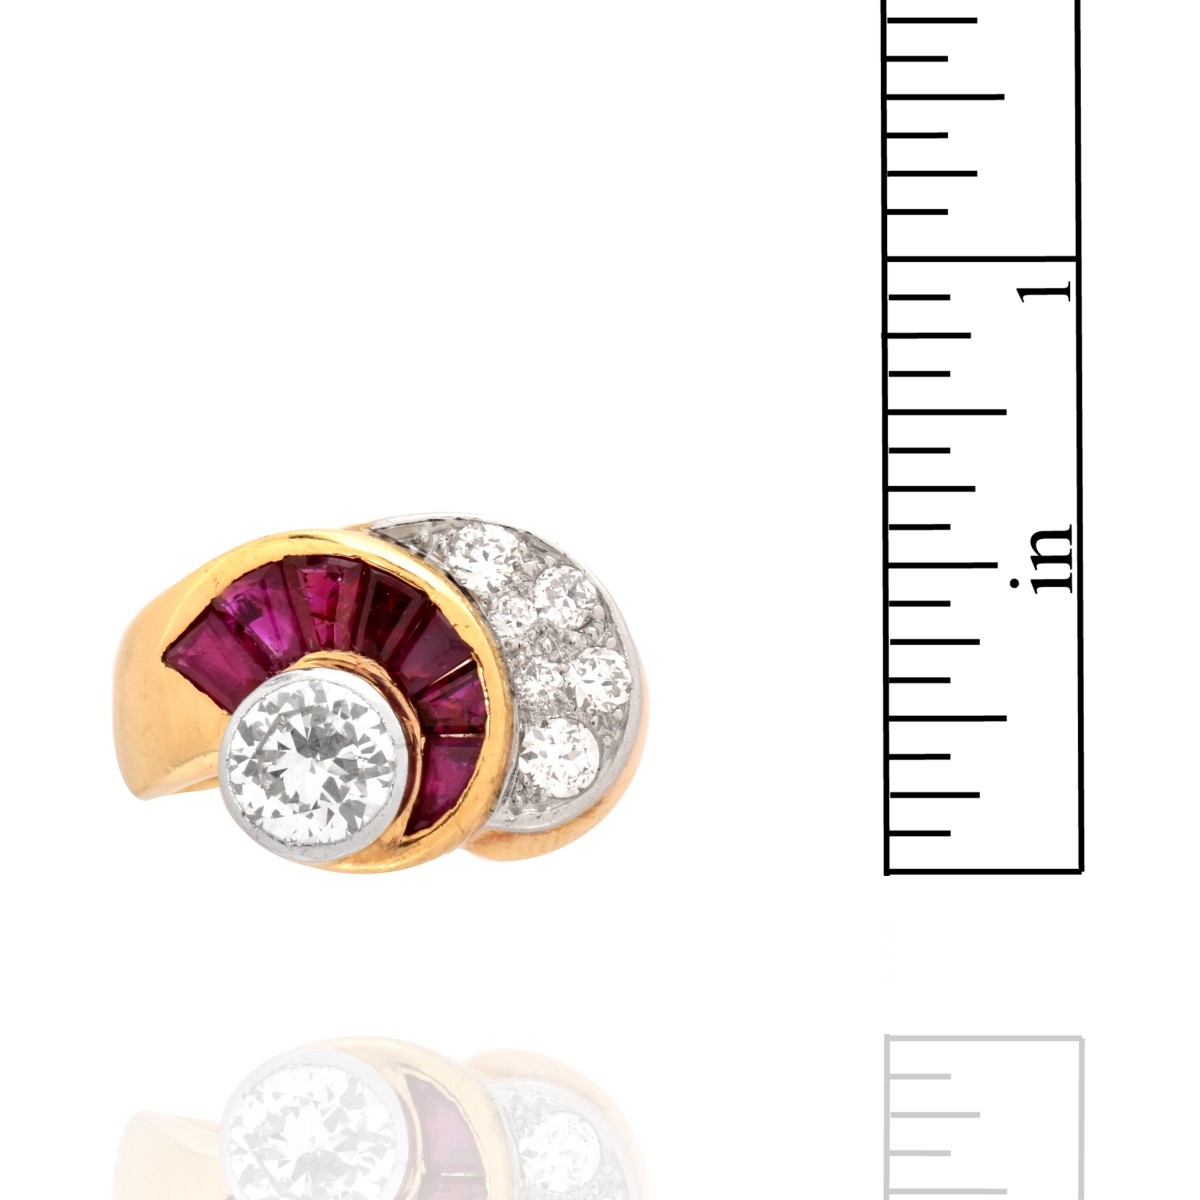 Diamond, Ruby and 14K Ring